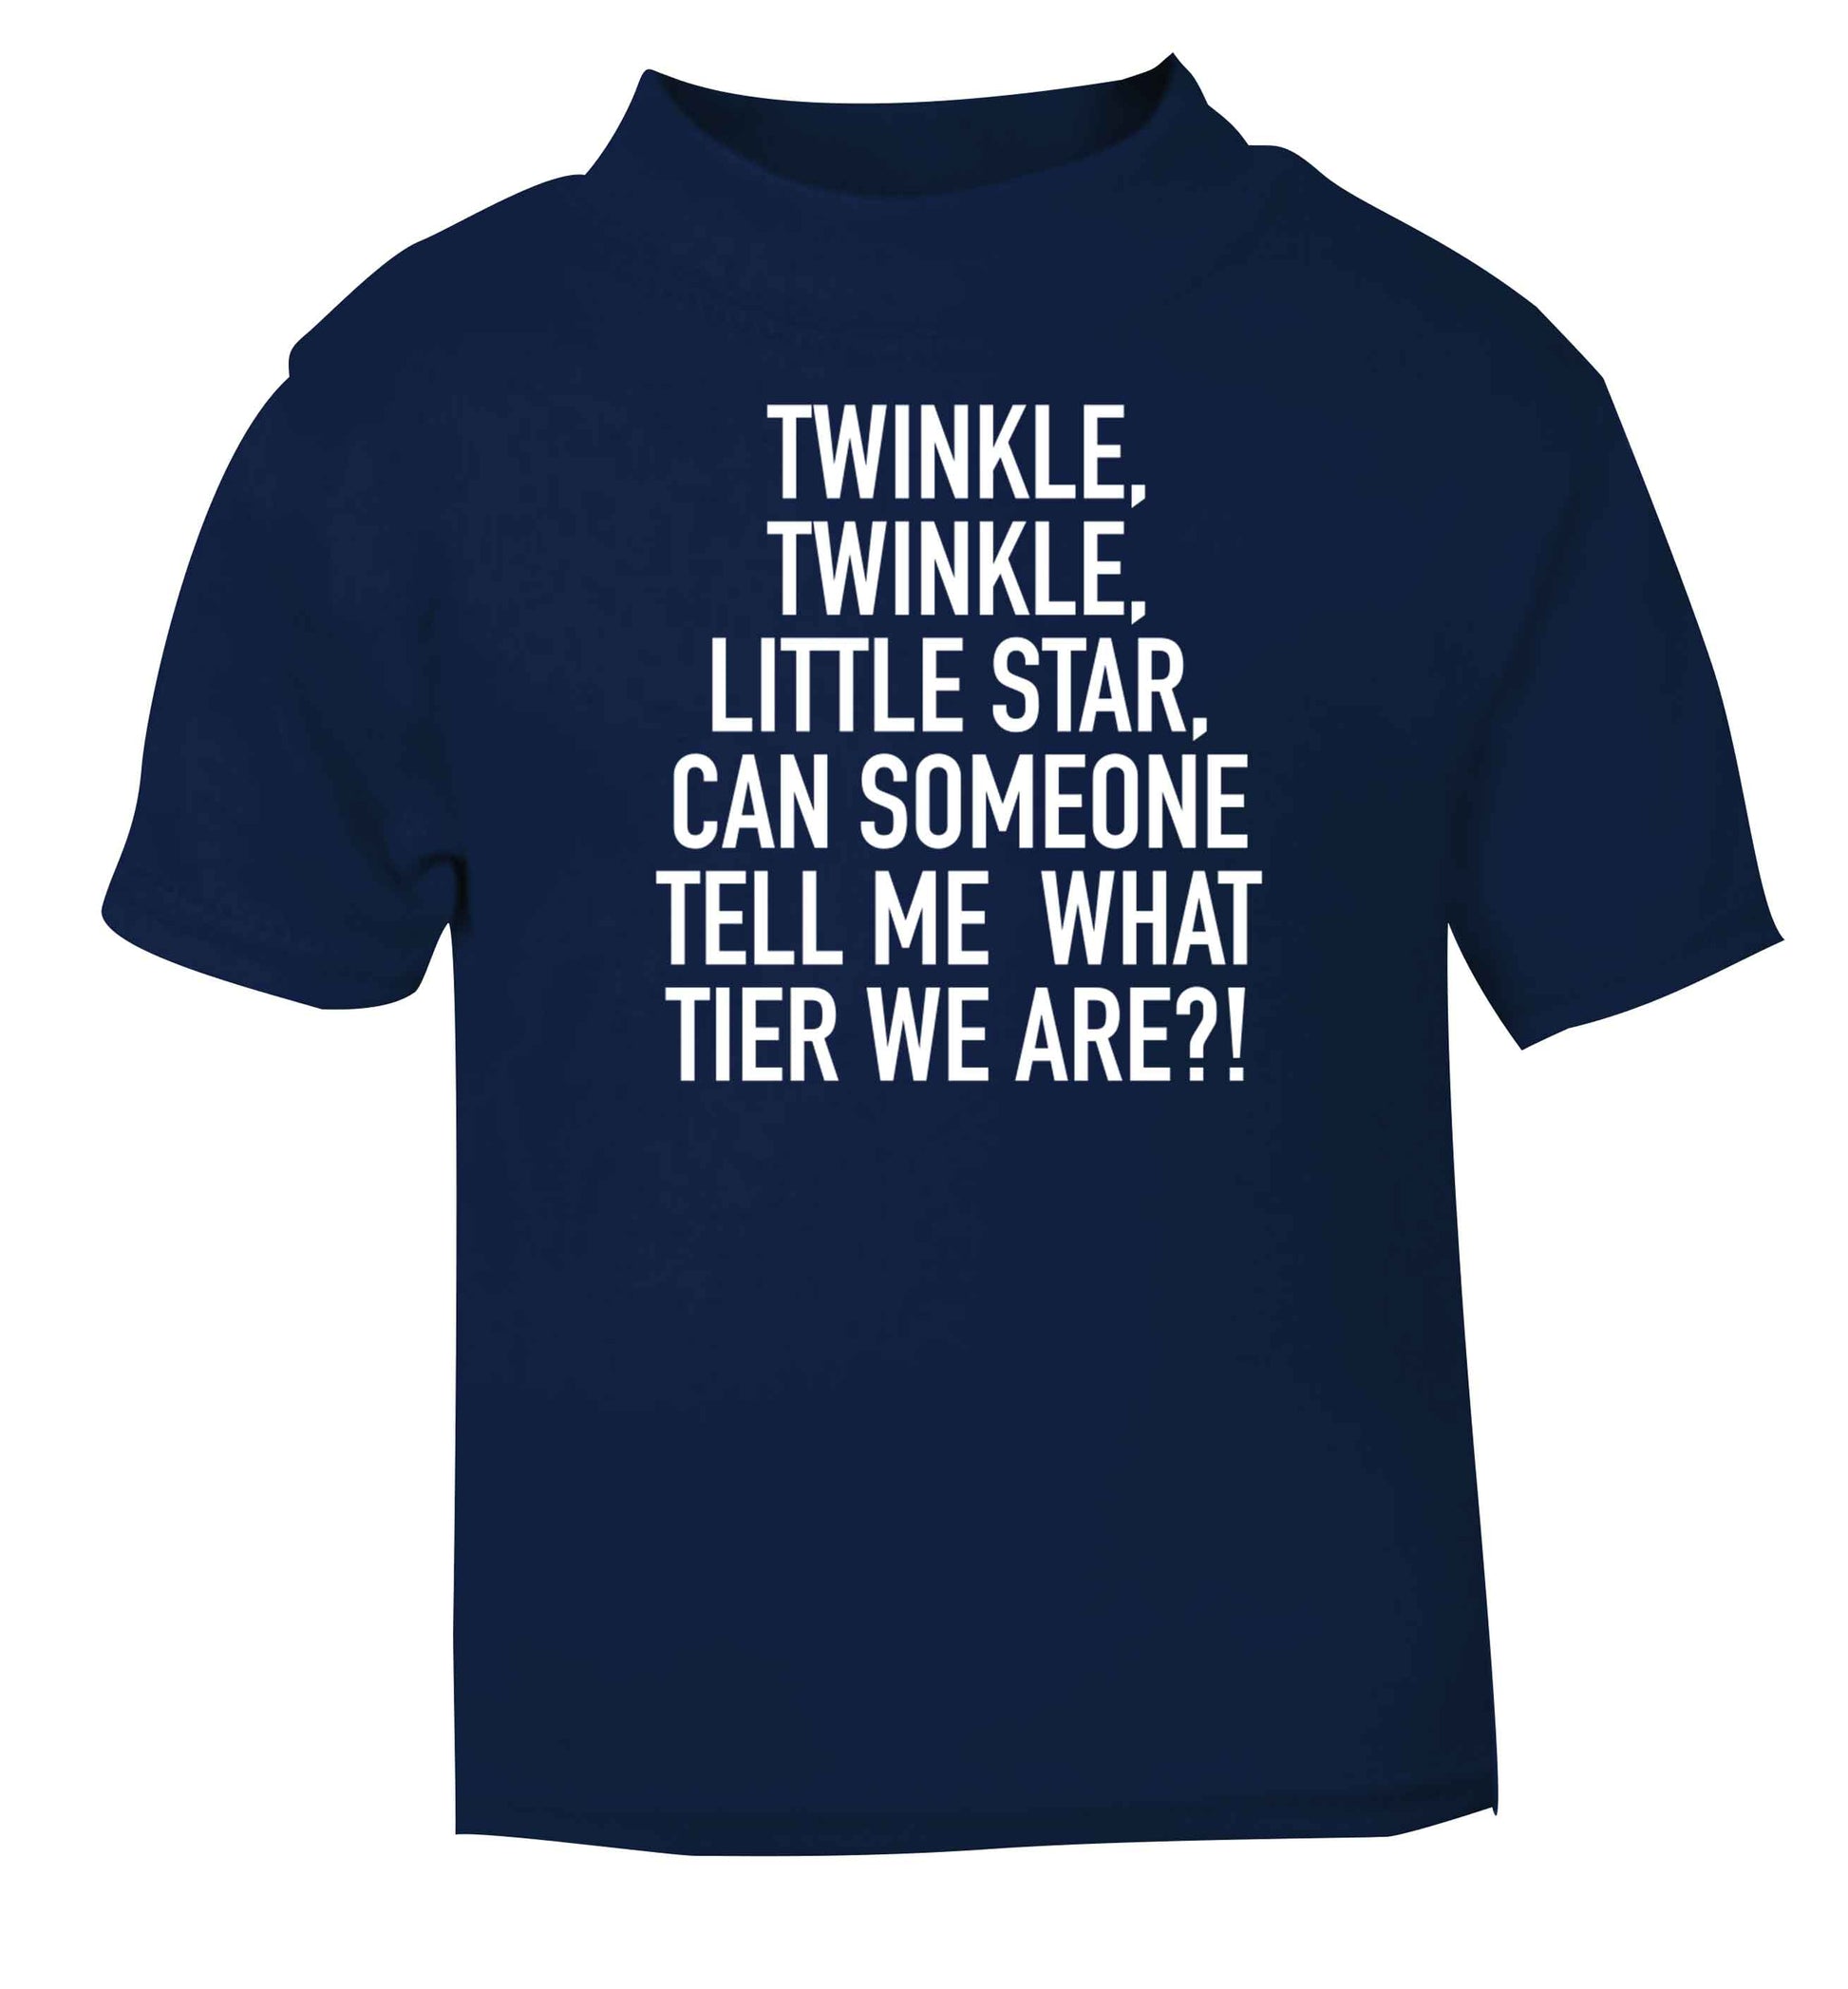 Twinkle twinkle, little star does anyone know what tier we are? navy baby toddler Tshirt 2 Years